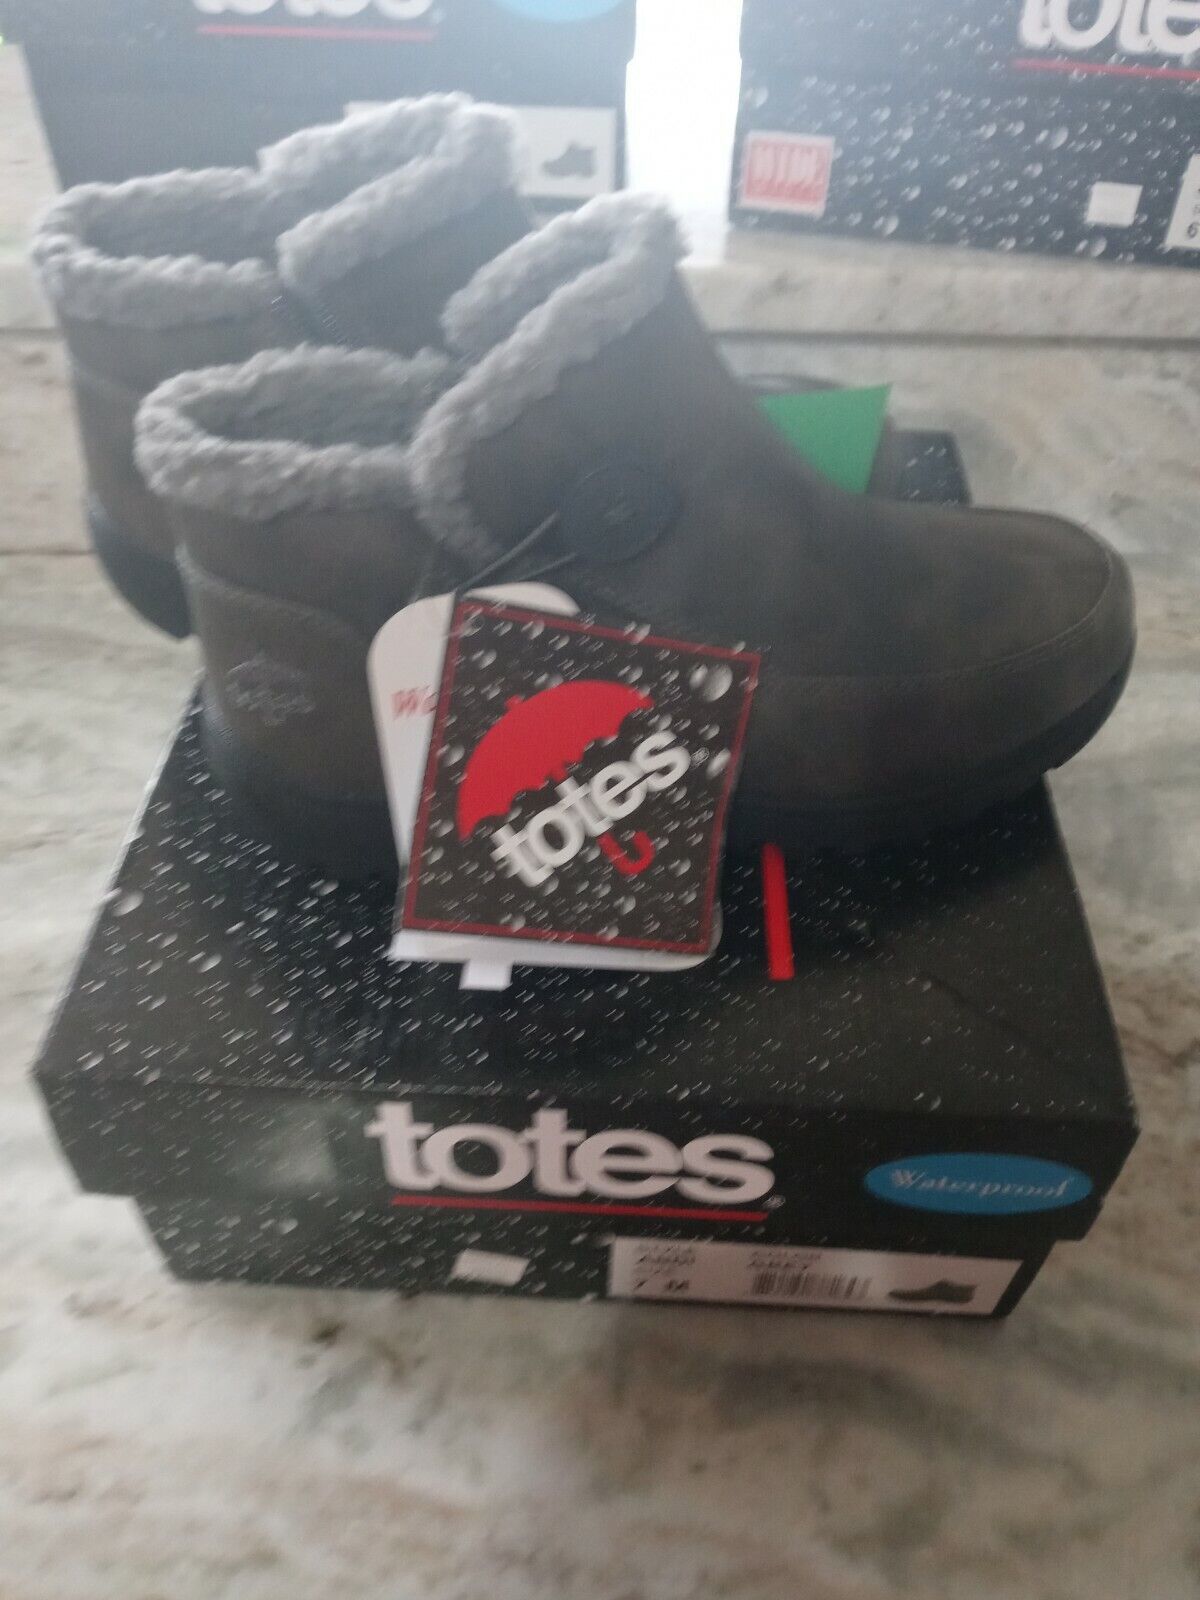 Totes Andi Grey Shoes Boots size 7